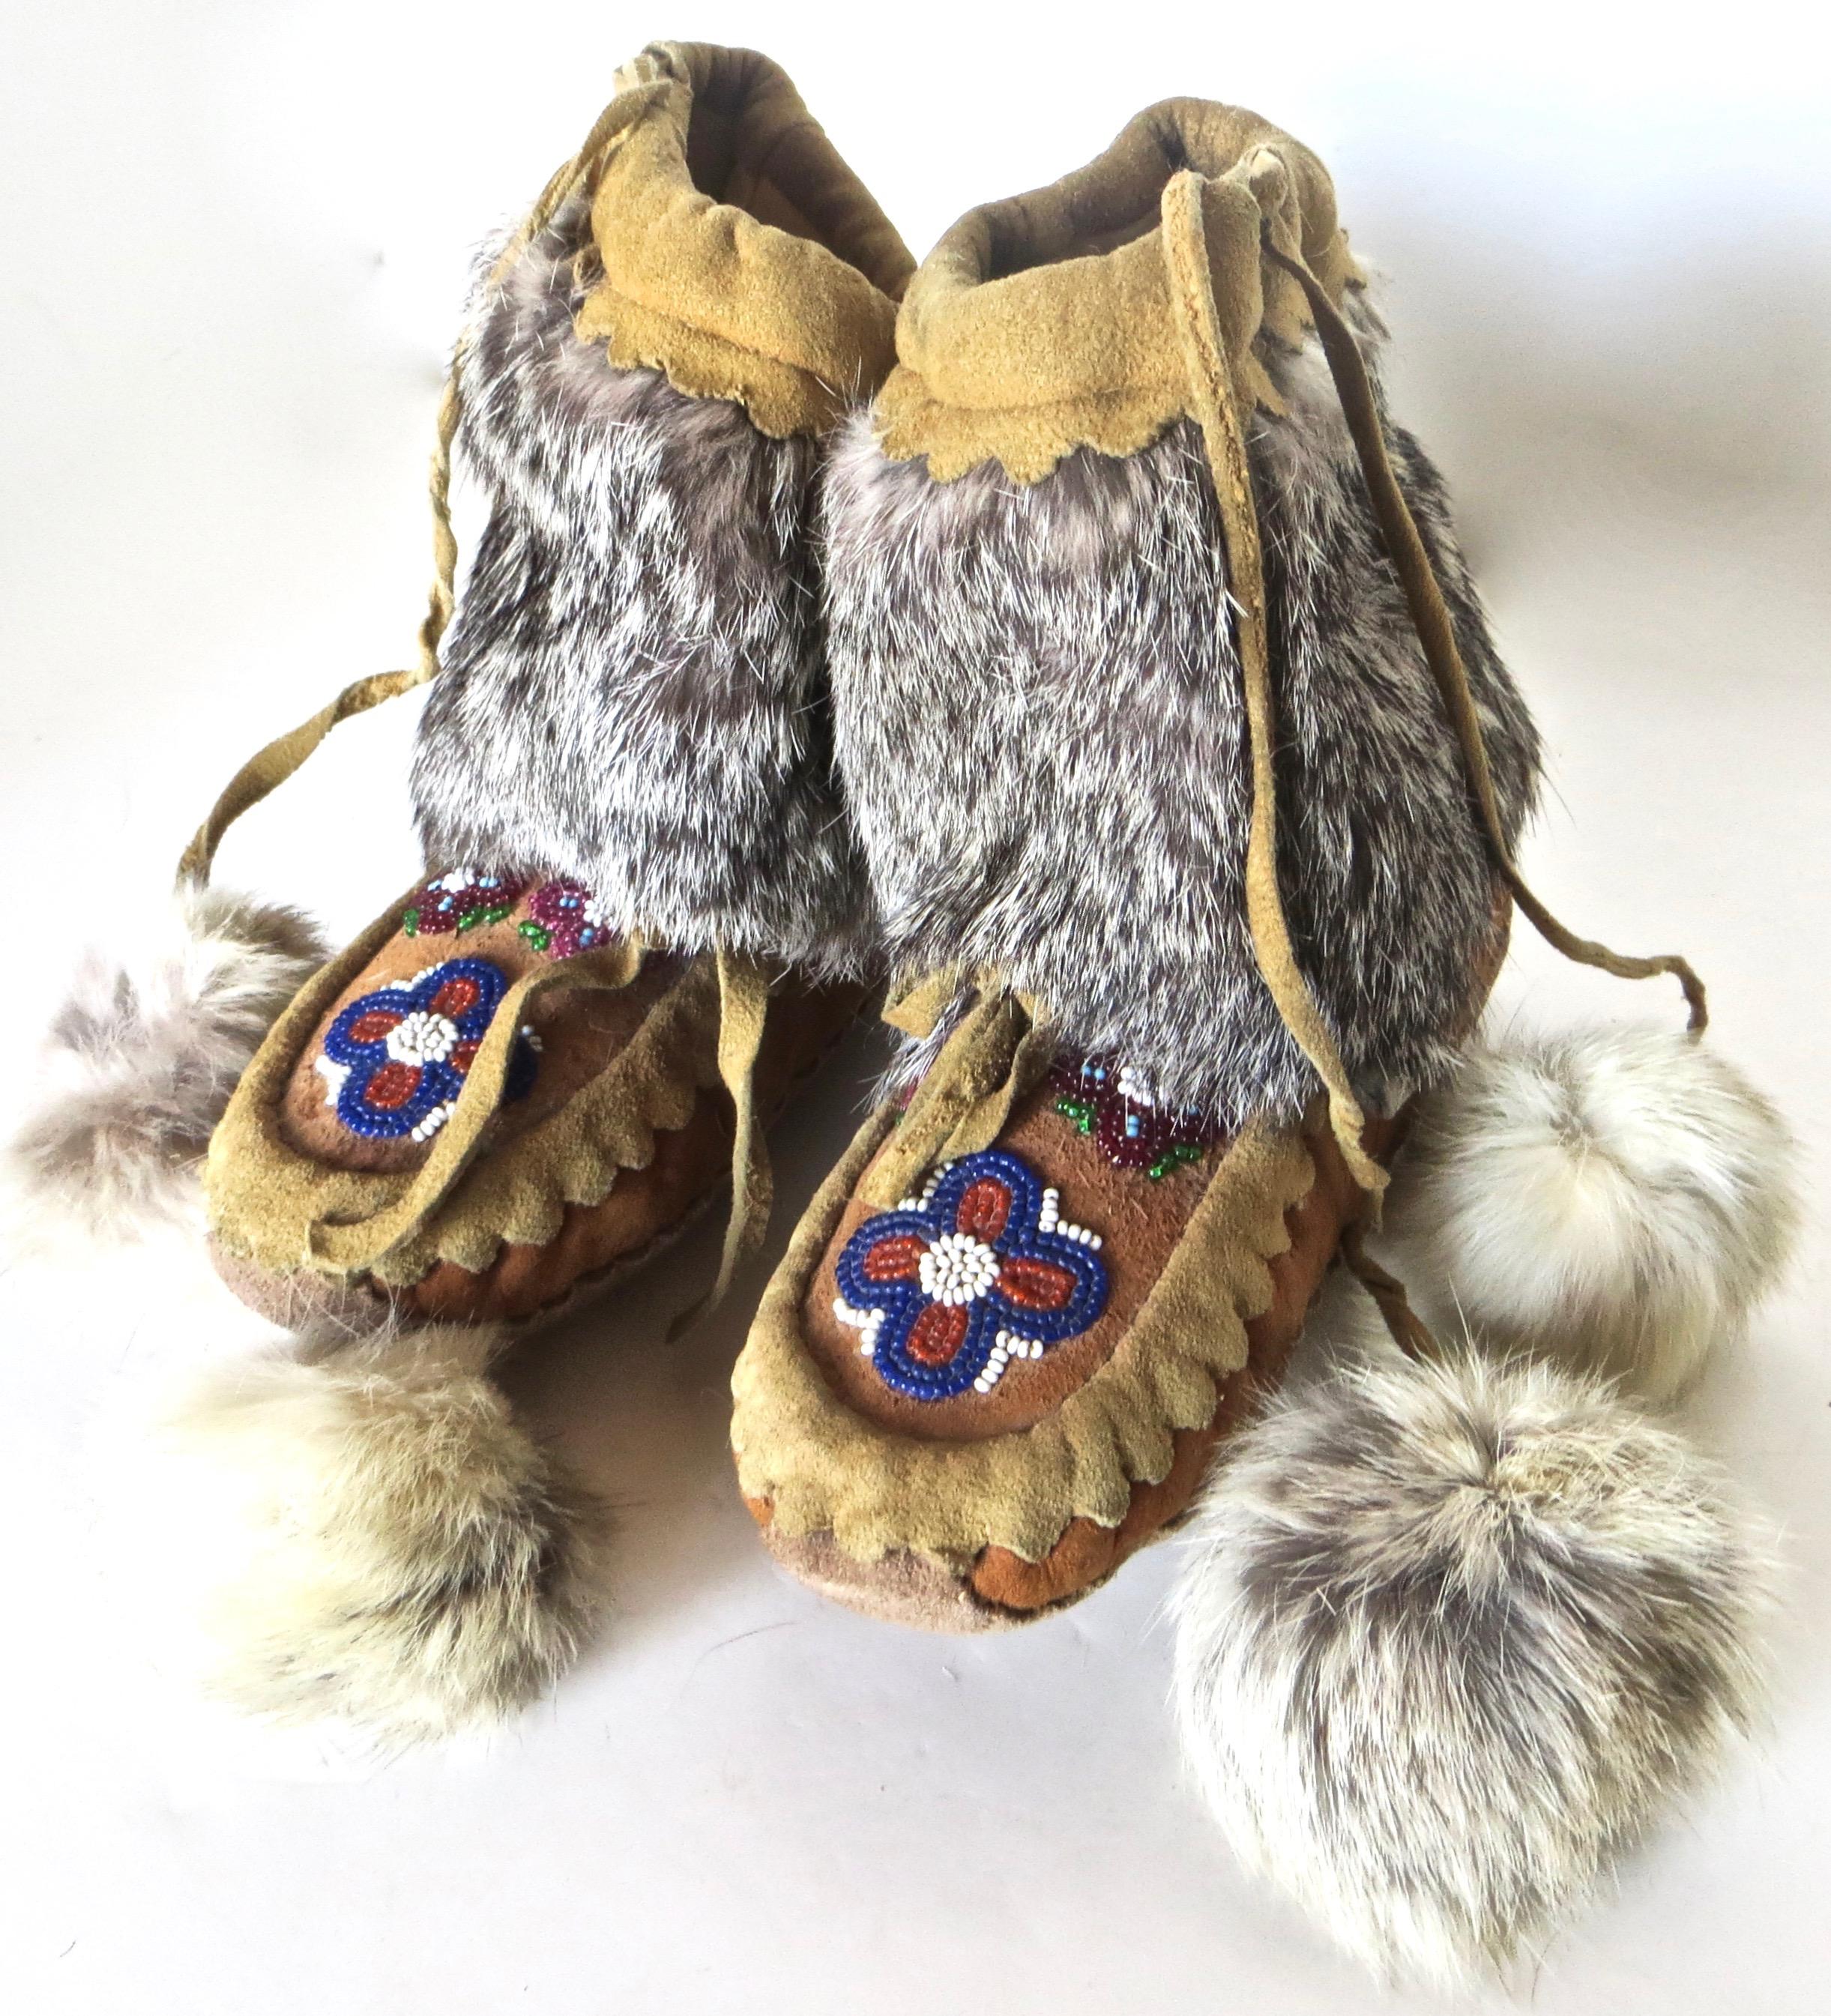 Beaded Pacific Northwest Native American Indian Child's High Top Moccasins, Circa 1930